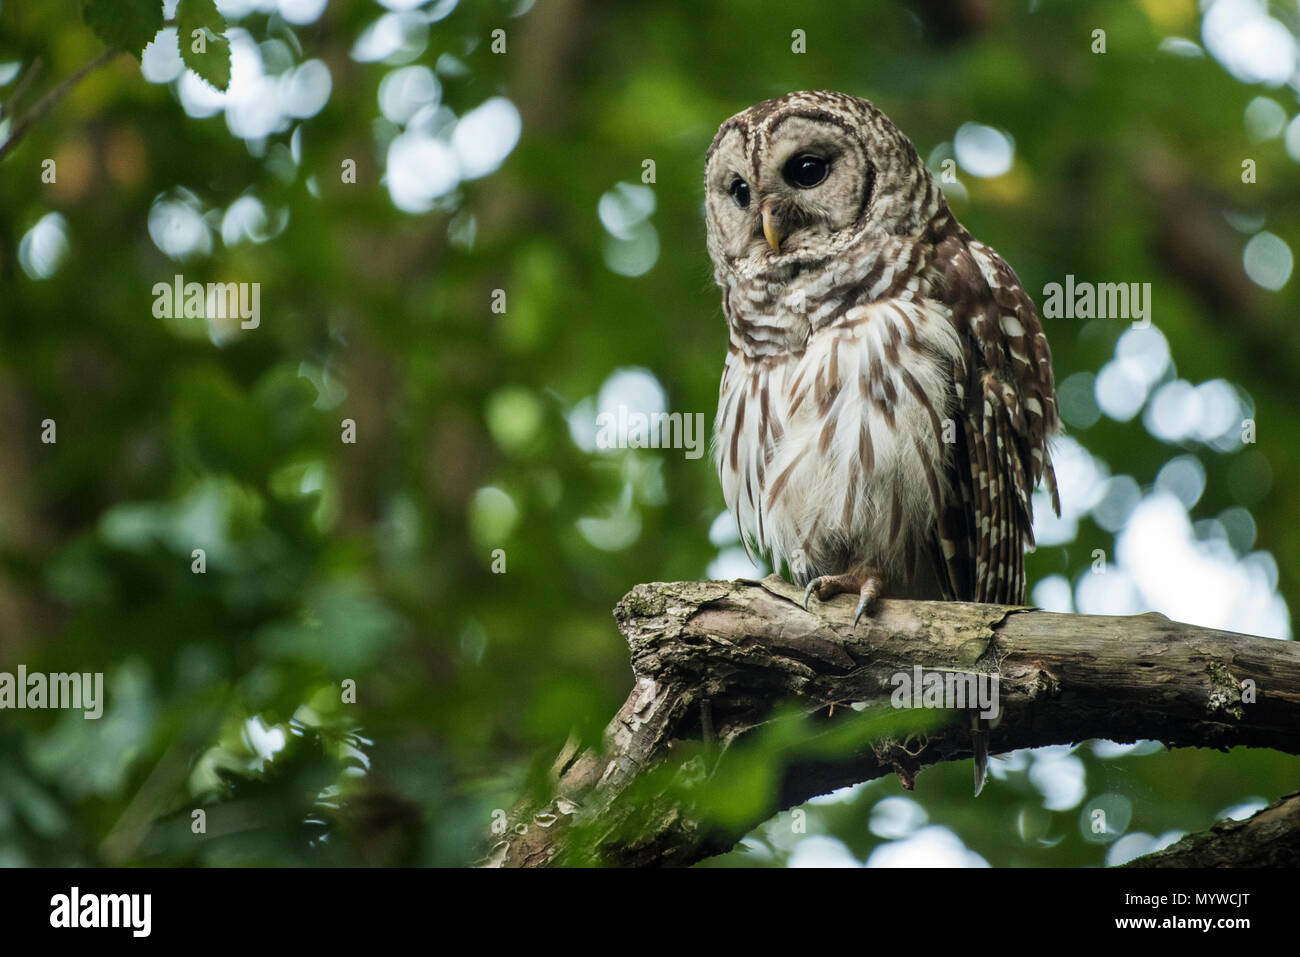 A barred owl (Strix varia) from North Carolina, these owls are nocturnal but can be observed active during the twilight hours as well. Stock Photo